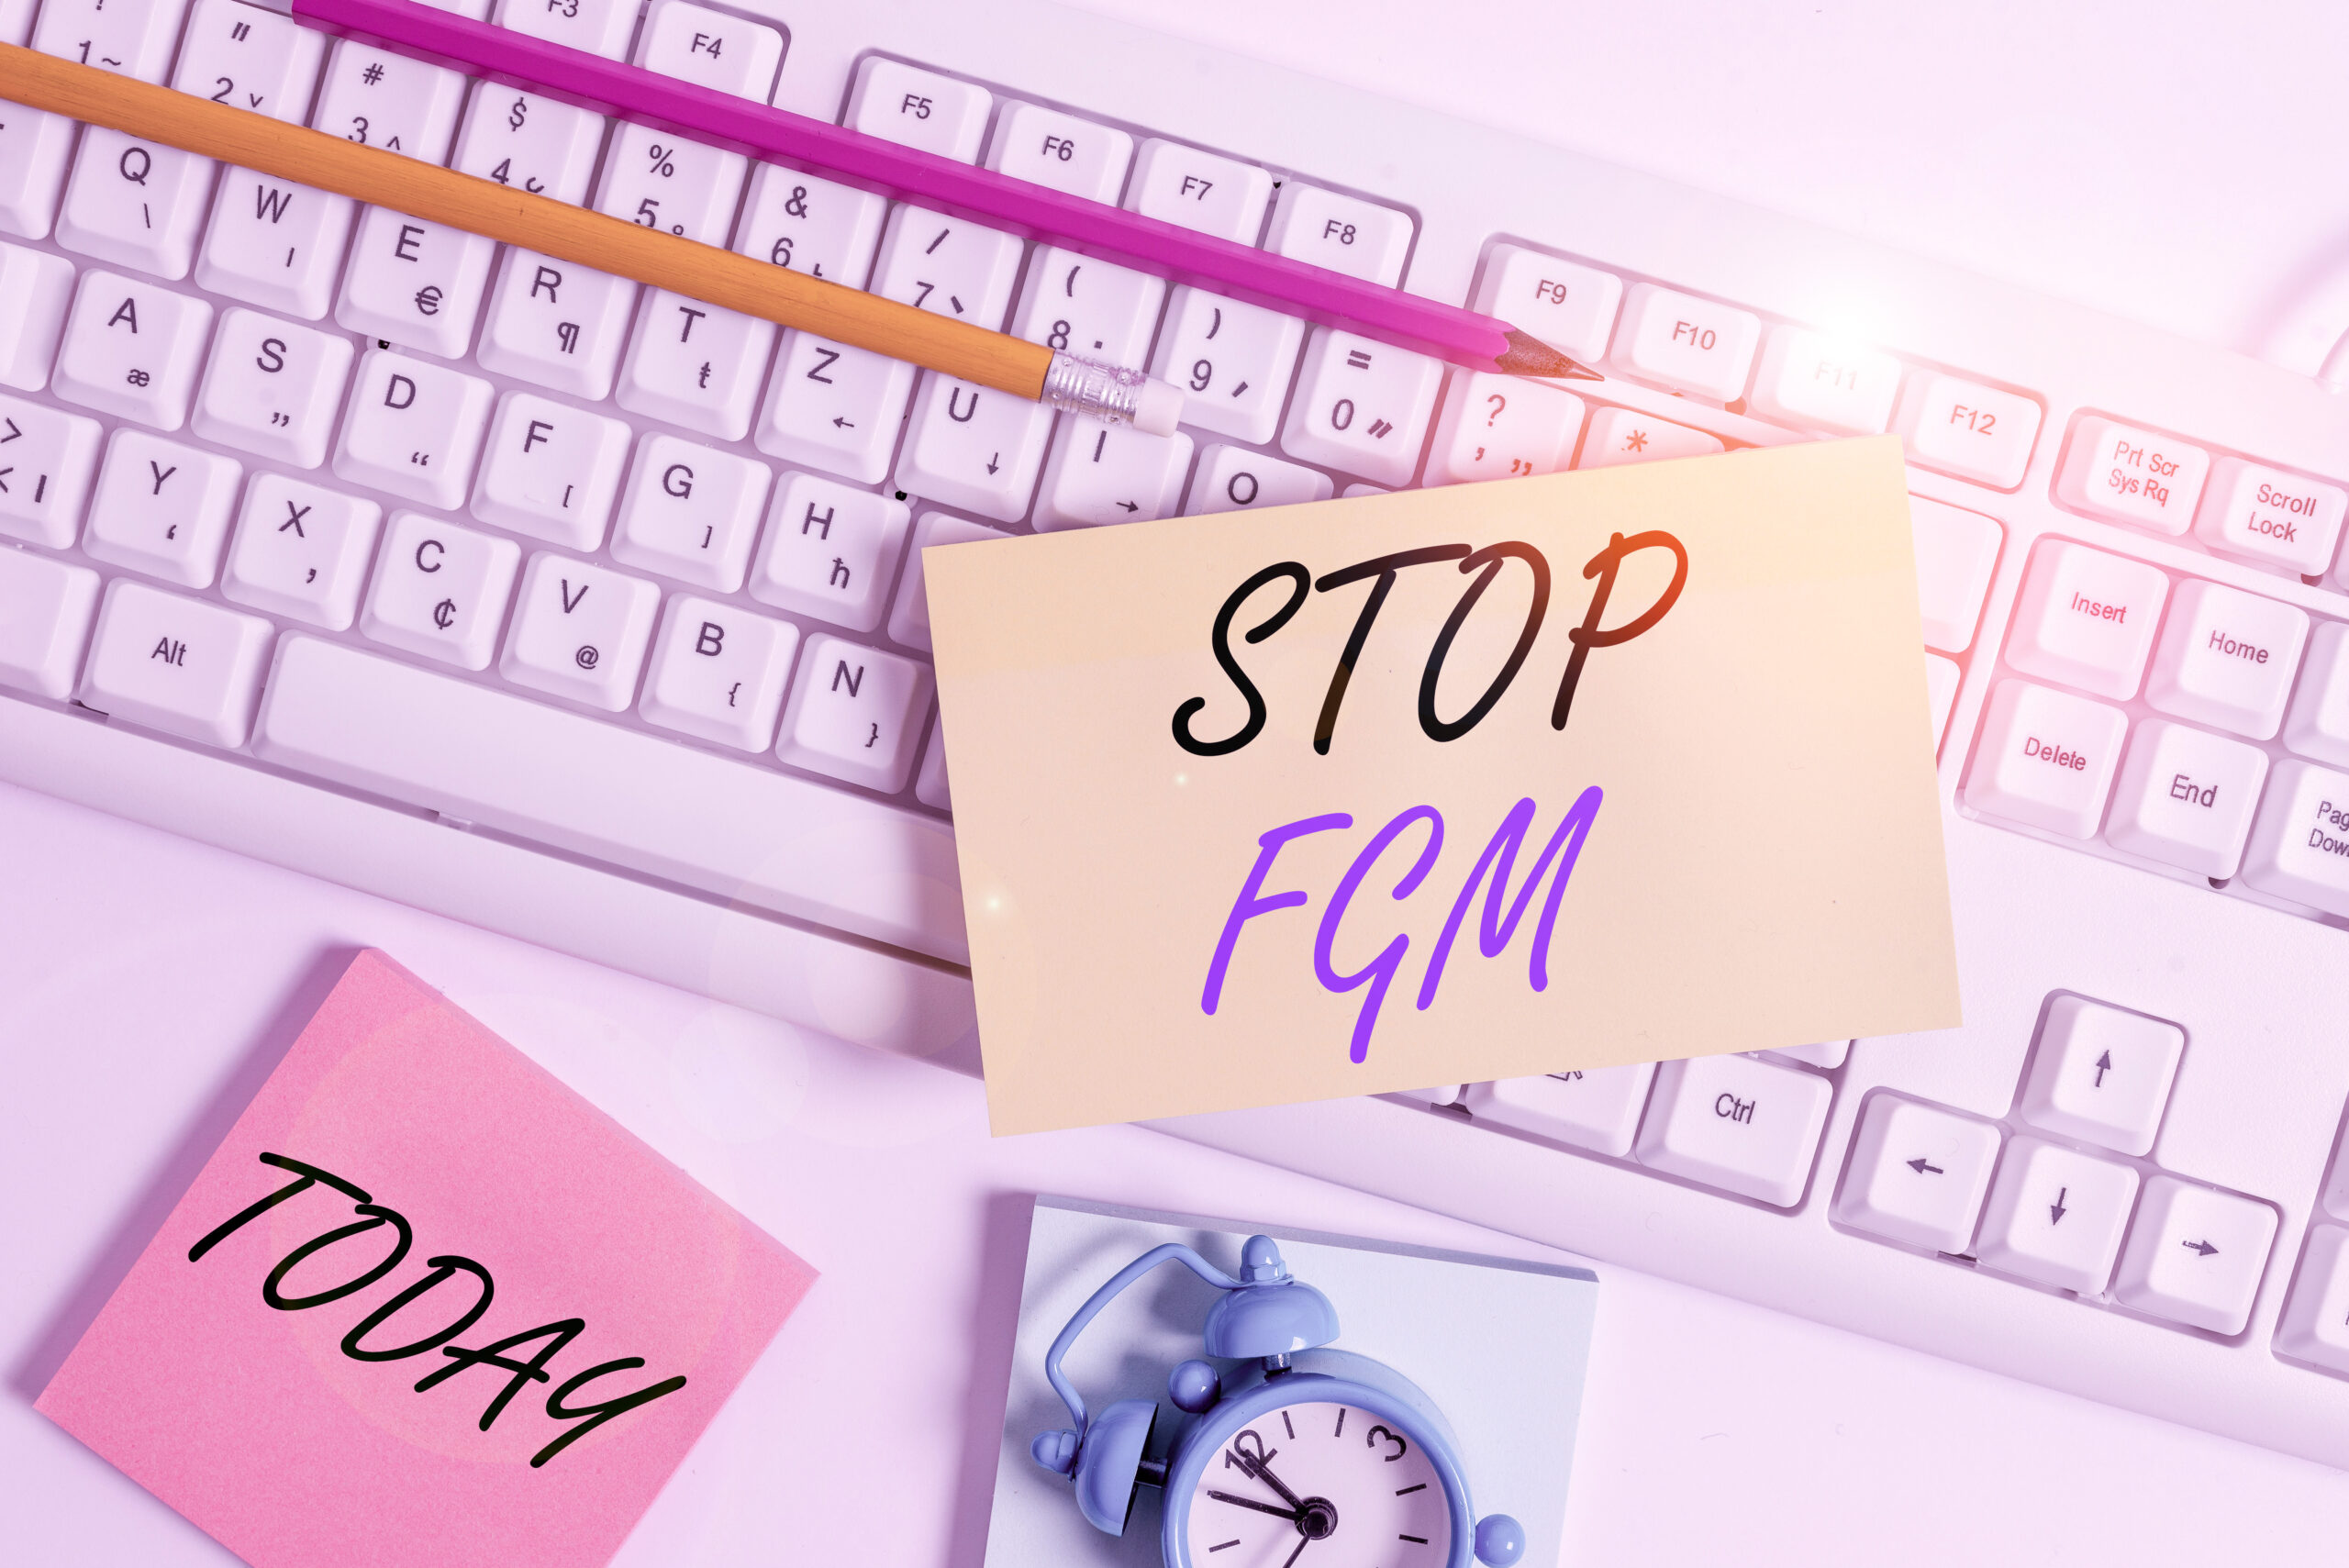 Text sign showing Stop Fgm. Business photo showcasing Put an end or stop on genital cutting and circumcision Flat lay above empty note paper on the pc keyboard pencils and clock